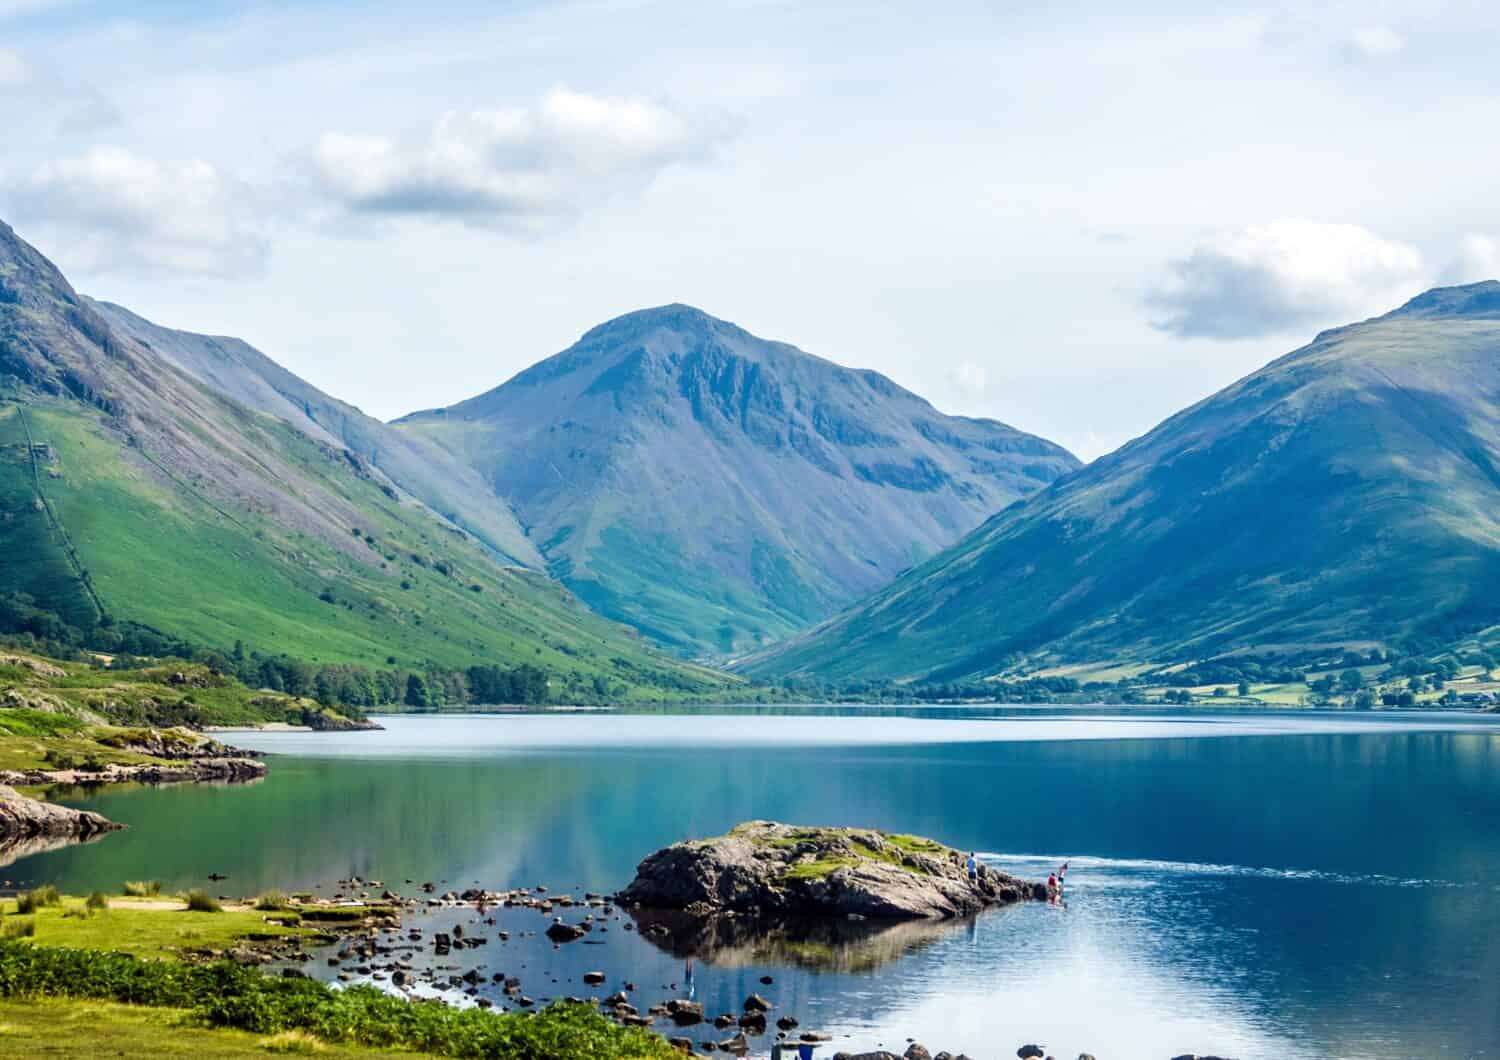 Wastwater is the deepest lake in England. Scafell Pike, the tallest mountain, can be seen in the distance.